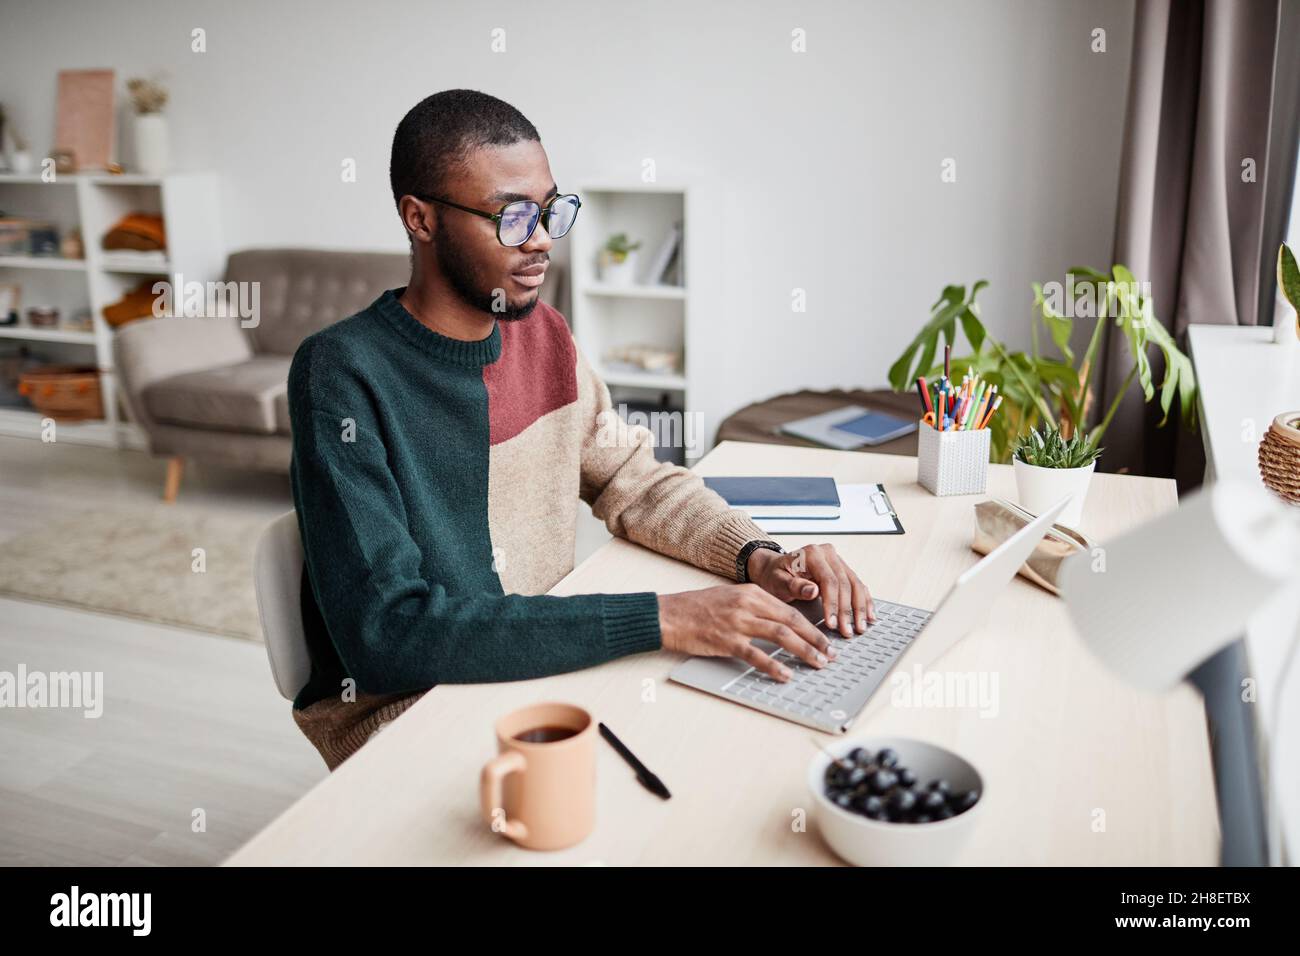 Portrait of young African-American man wearing glasses while working from home and using laptop, copy space Stock Photo